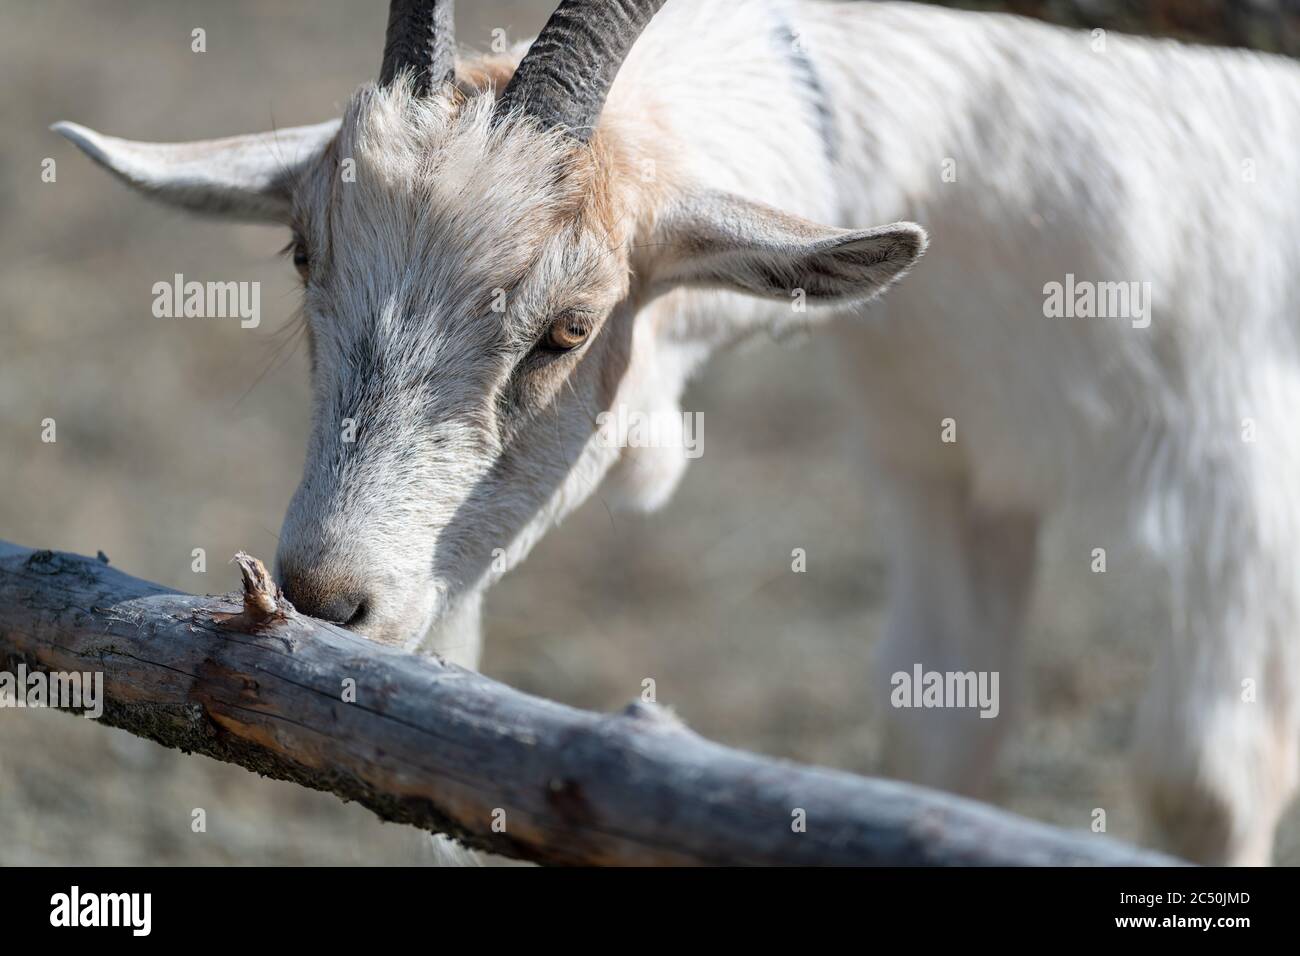 A white hair domestic goat with large ears, black narrow horns and a long snout grazing on a wooden fence in a farm's field. Stock Photo